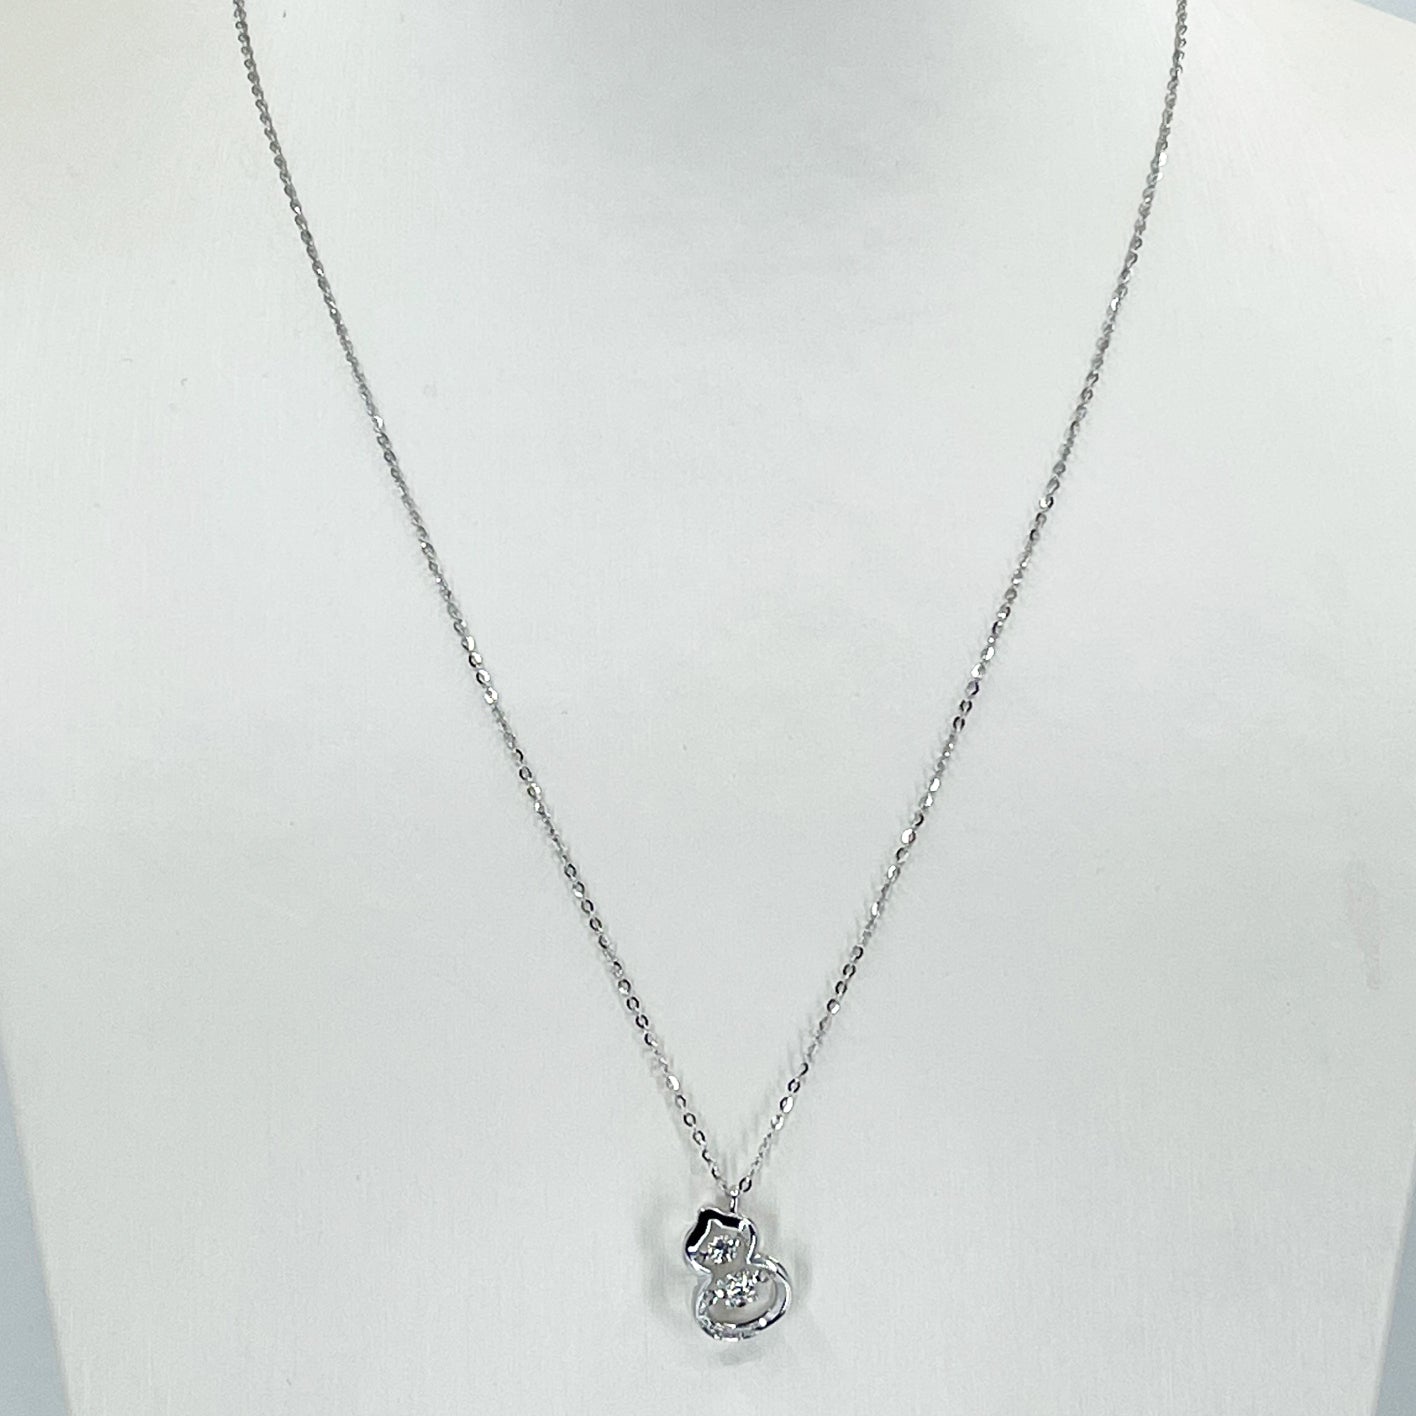 18K Solid White Gold Round Link Chain Necklace with Diamond Gourd Pendant 16